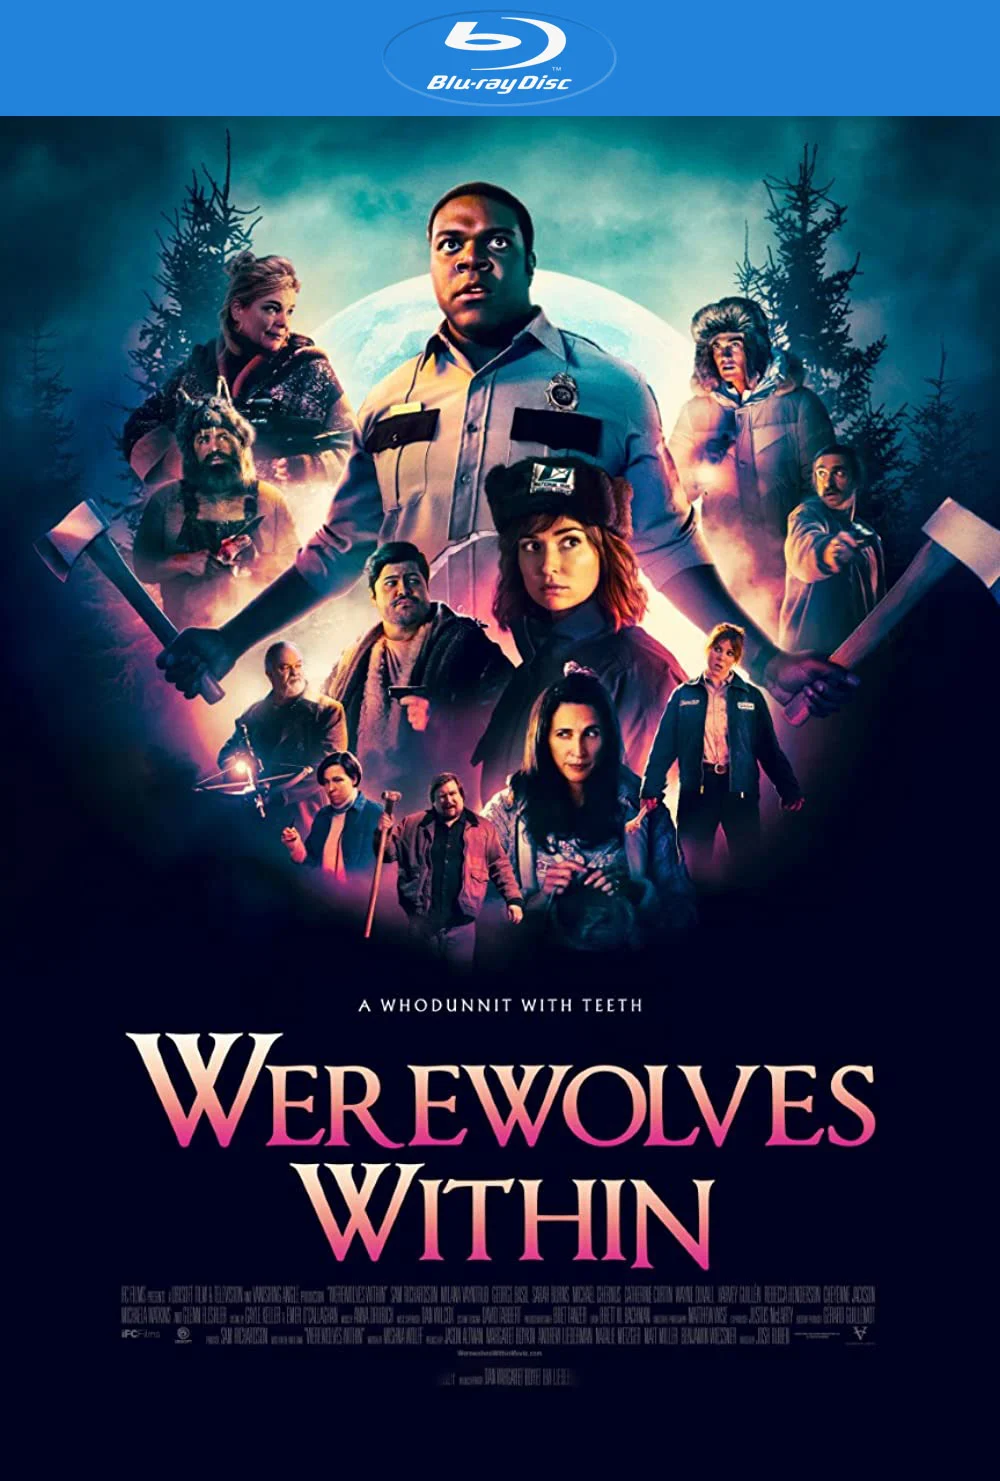 Werewolves Within (Blu-ray) on MovieShack